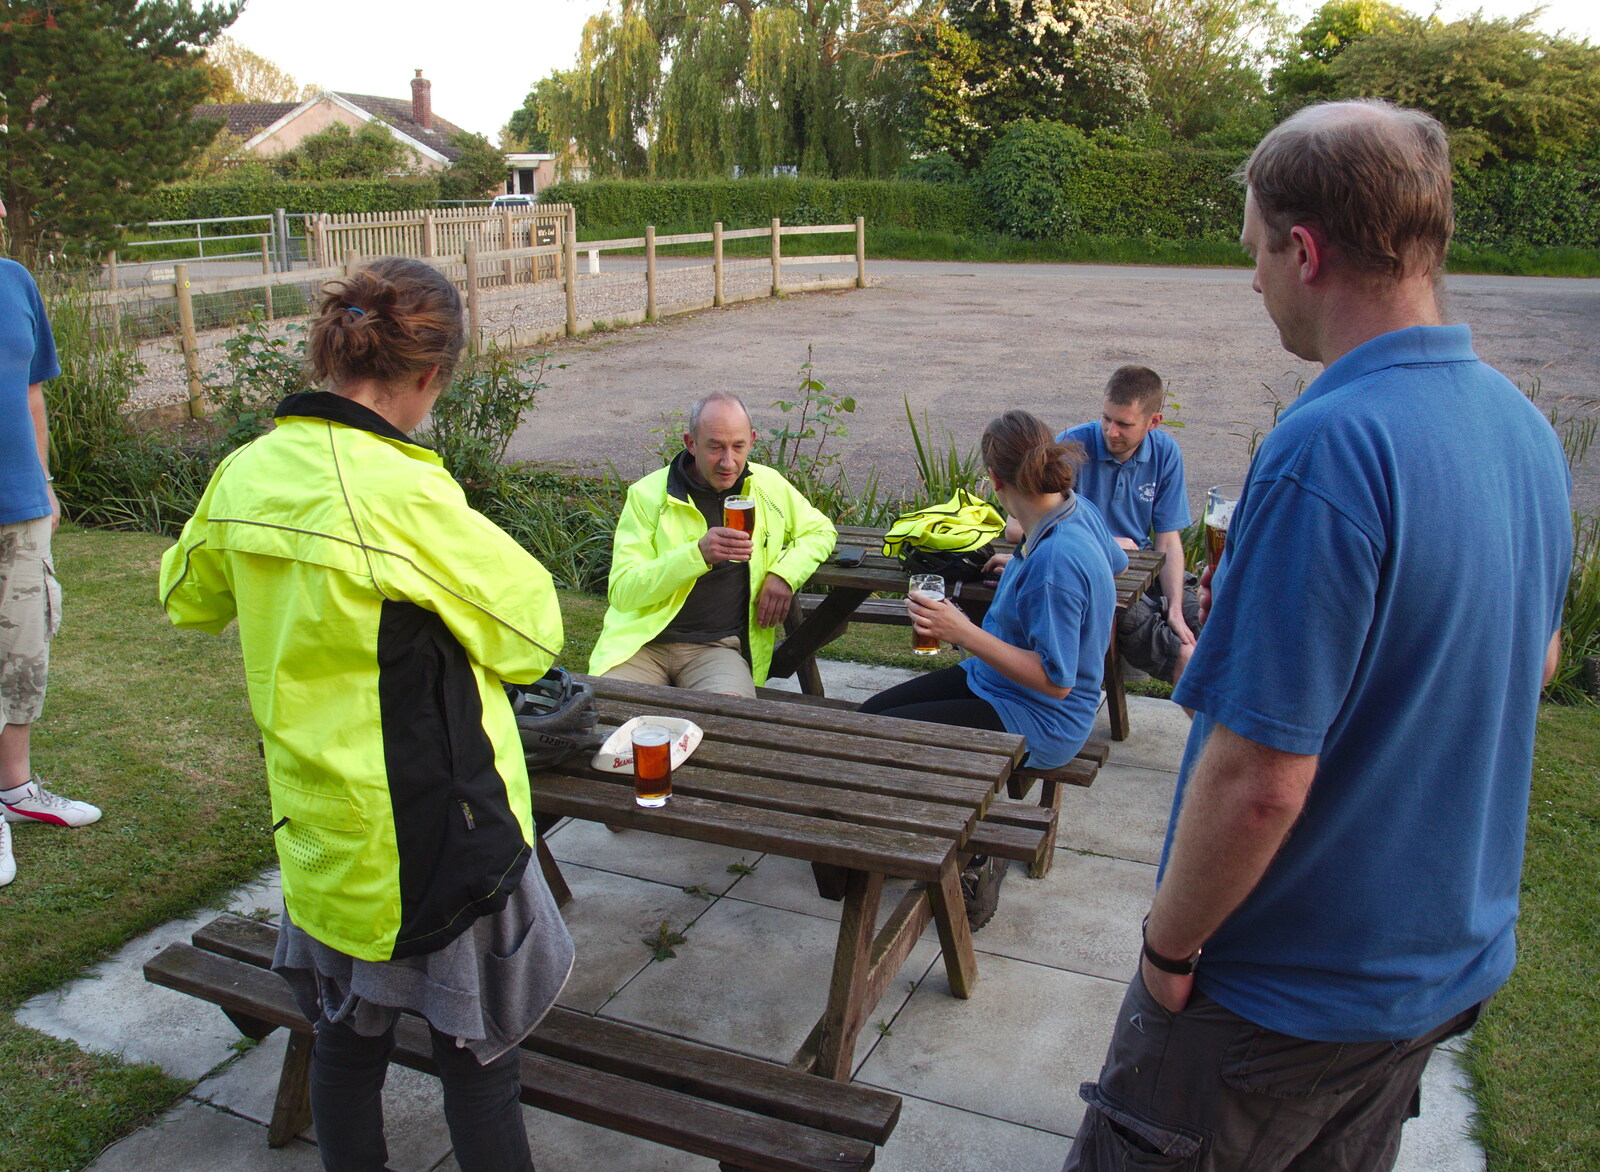 Time for a beer in the beer garden from The BSCC at The Crown, Bedfield, Suffolk - 15th May 2014